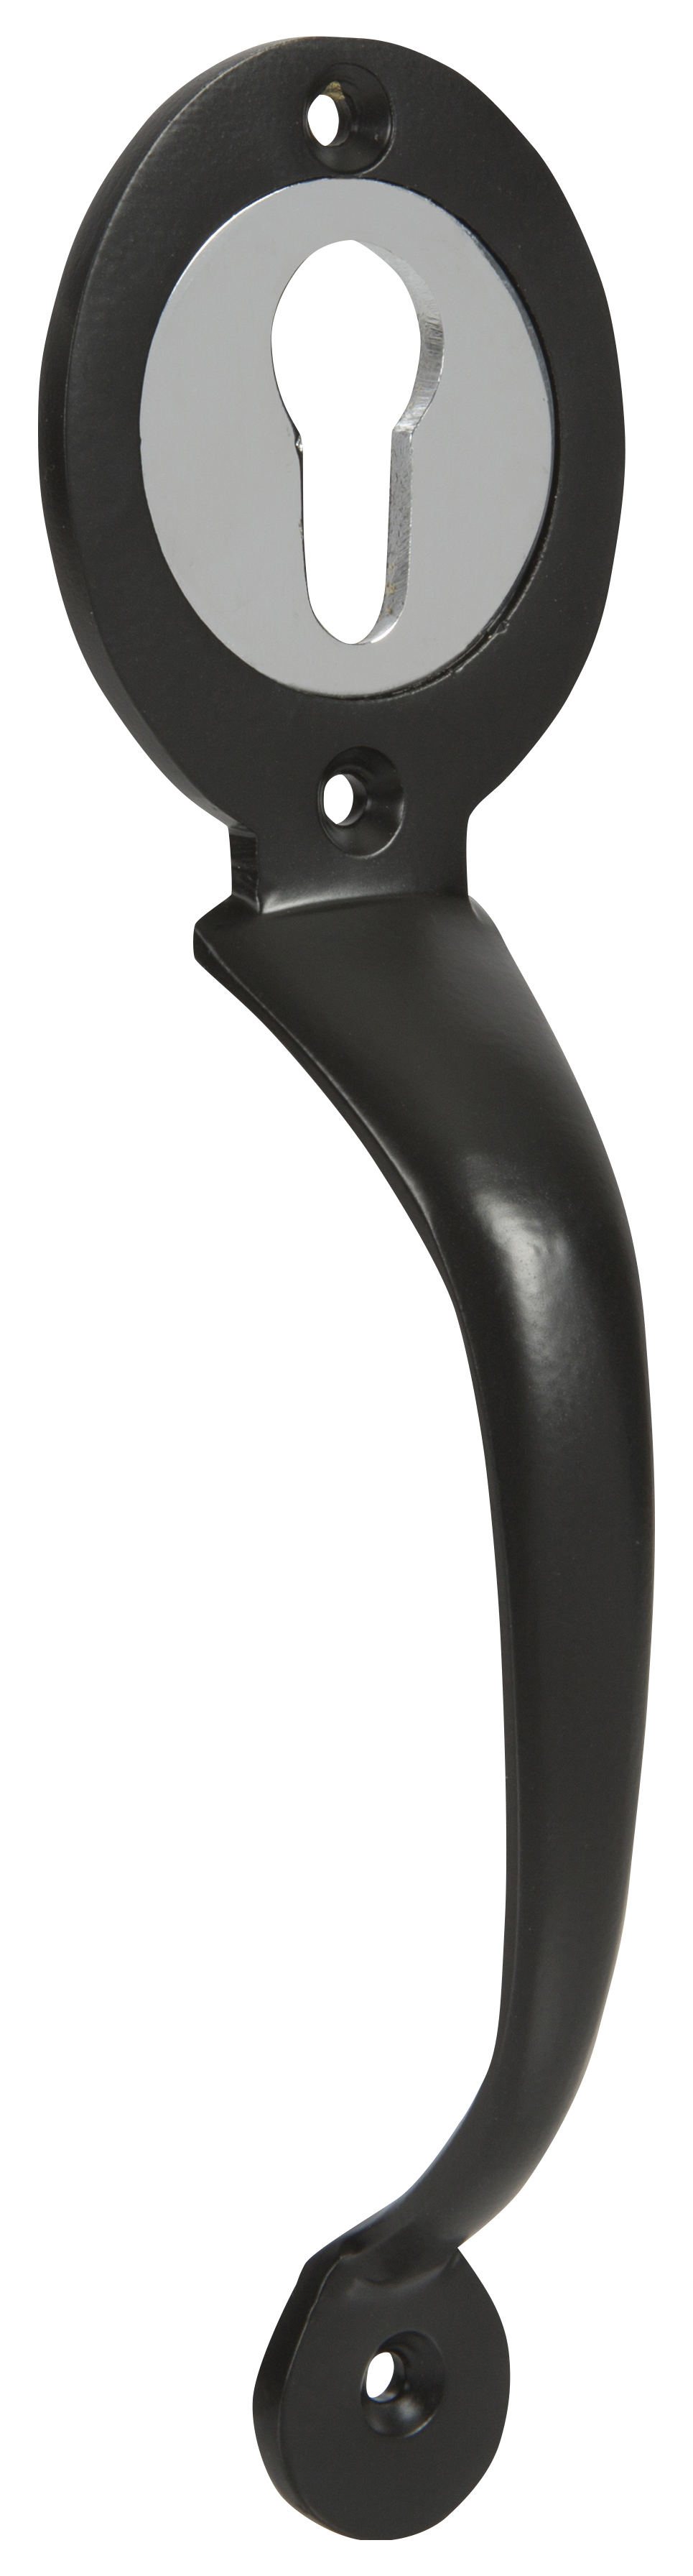 Image of GateMate B1472013 Epoxy Black Pull Handle for Euro Profile Long Throw Lock - 8in (200mm)